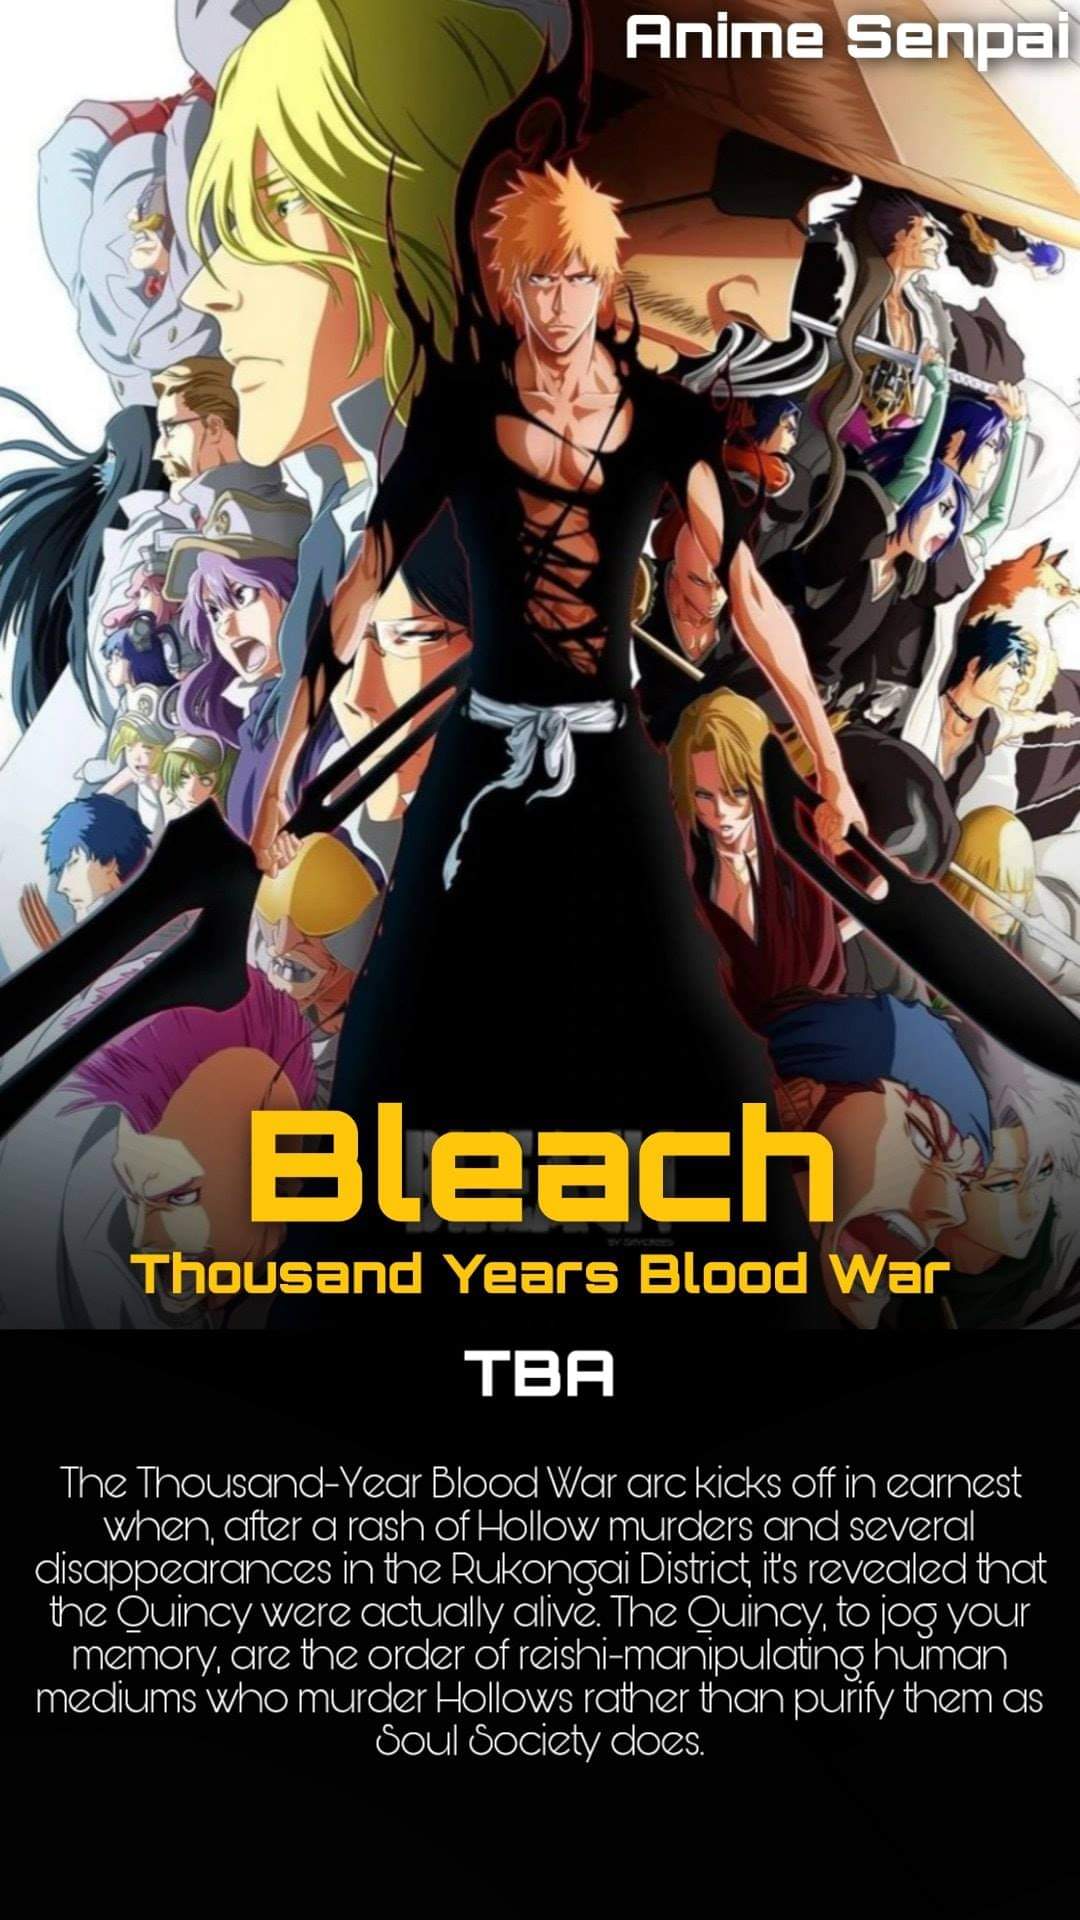 Thread For Anime Lovers - TV/Movies (254) - Nigeria